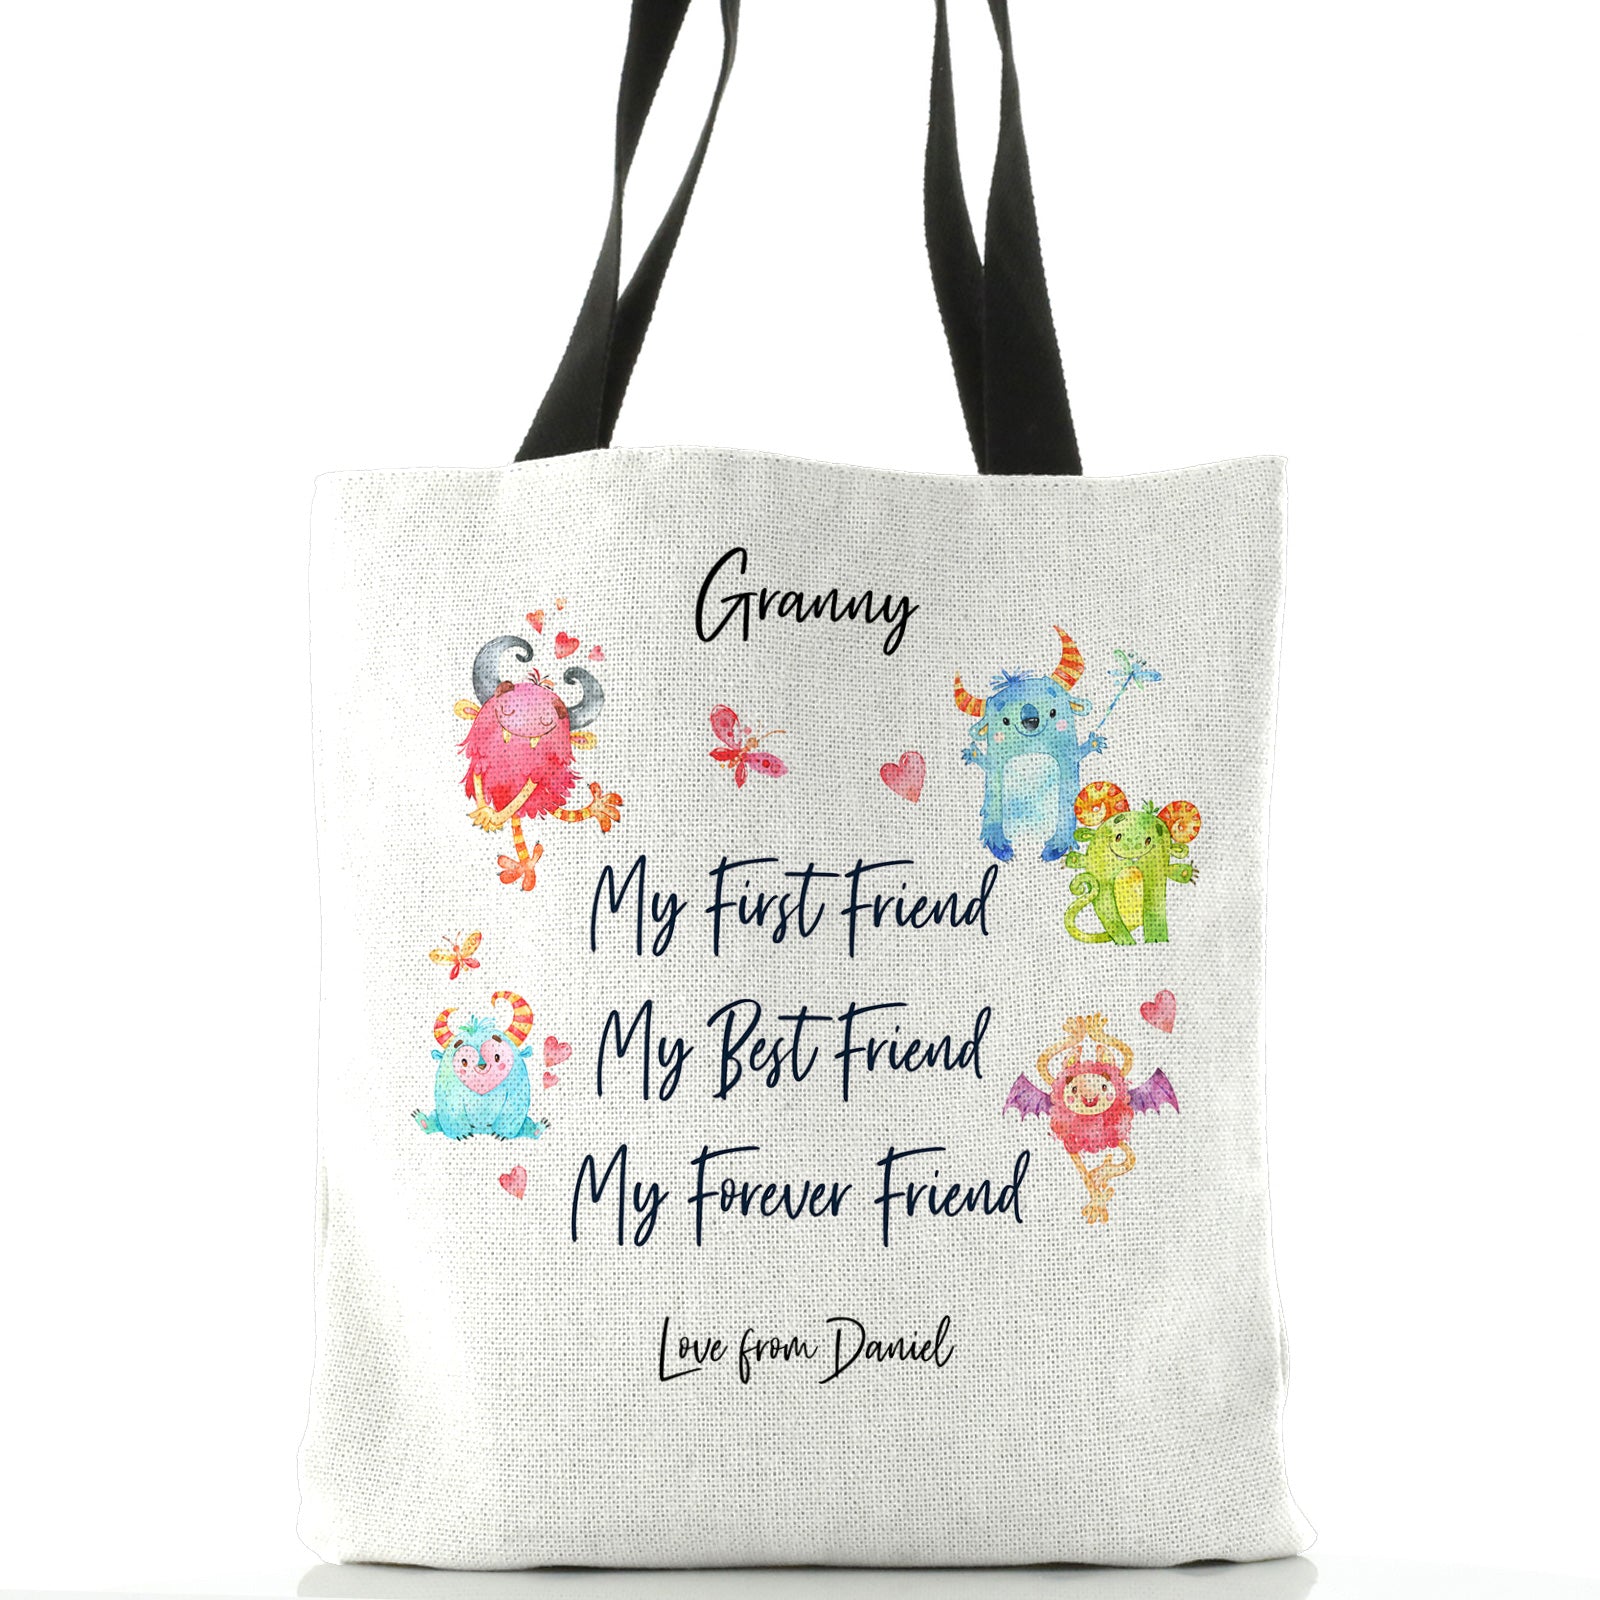 Personalised White Tote Bag with Stylish Text and Forever Friend Monster Message